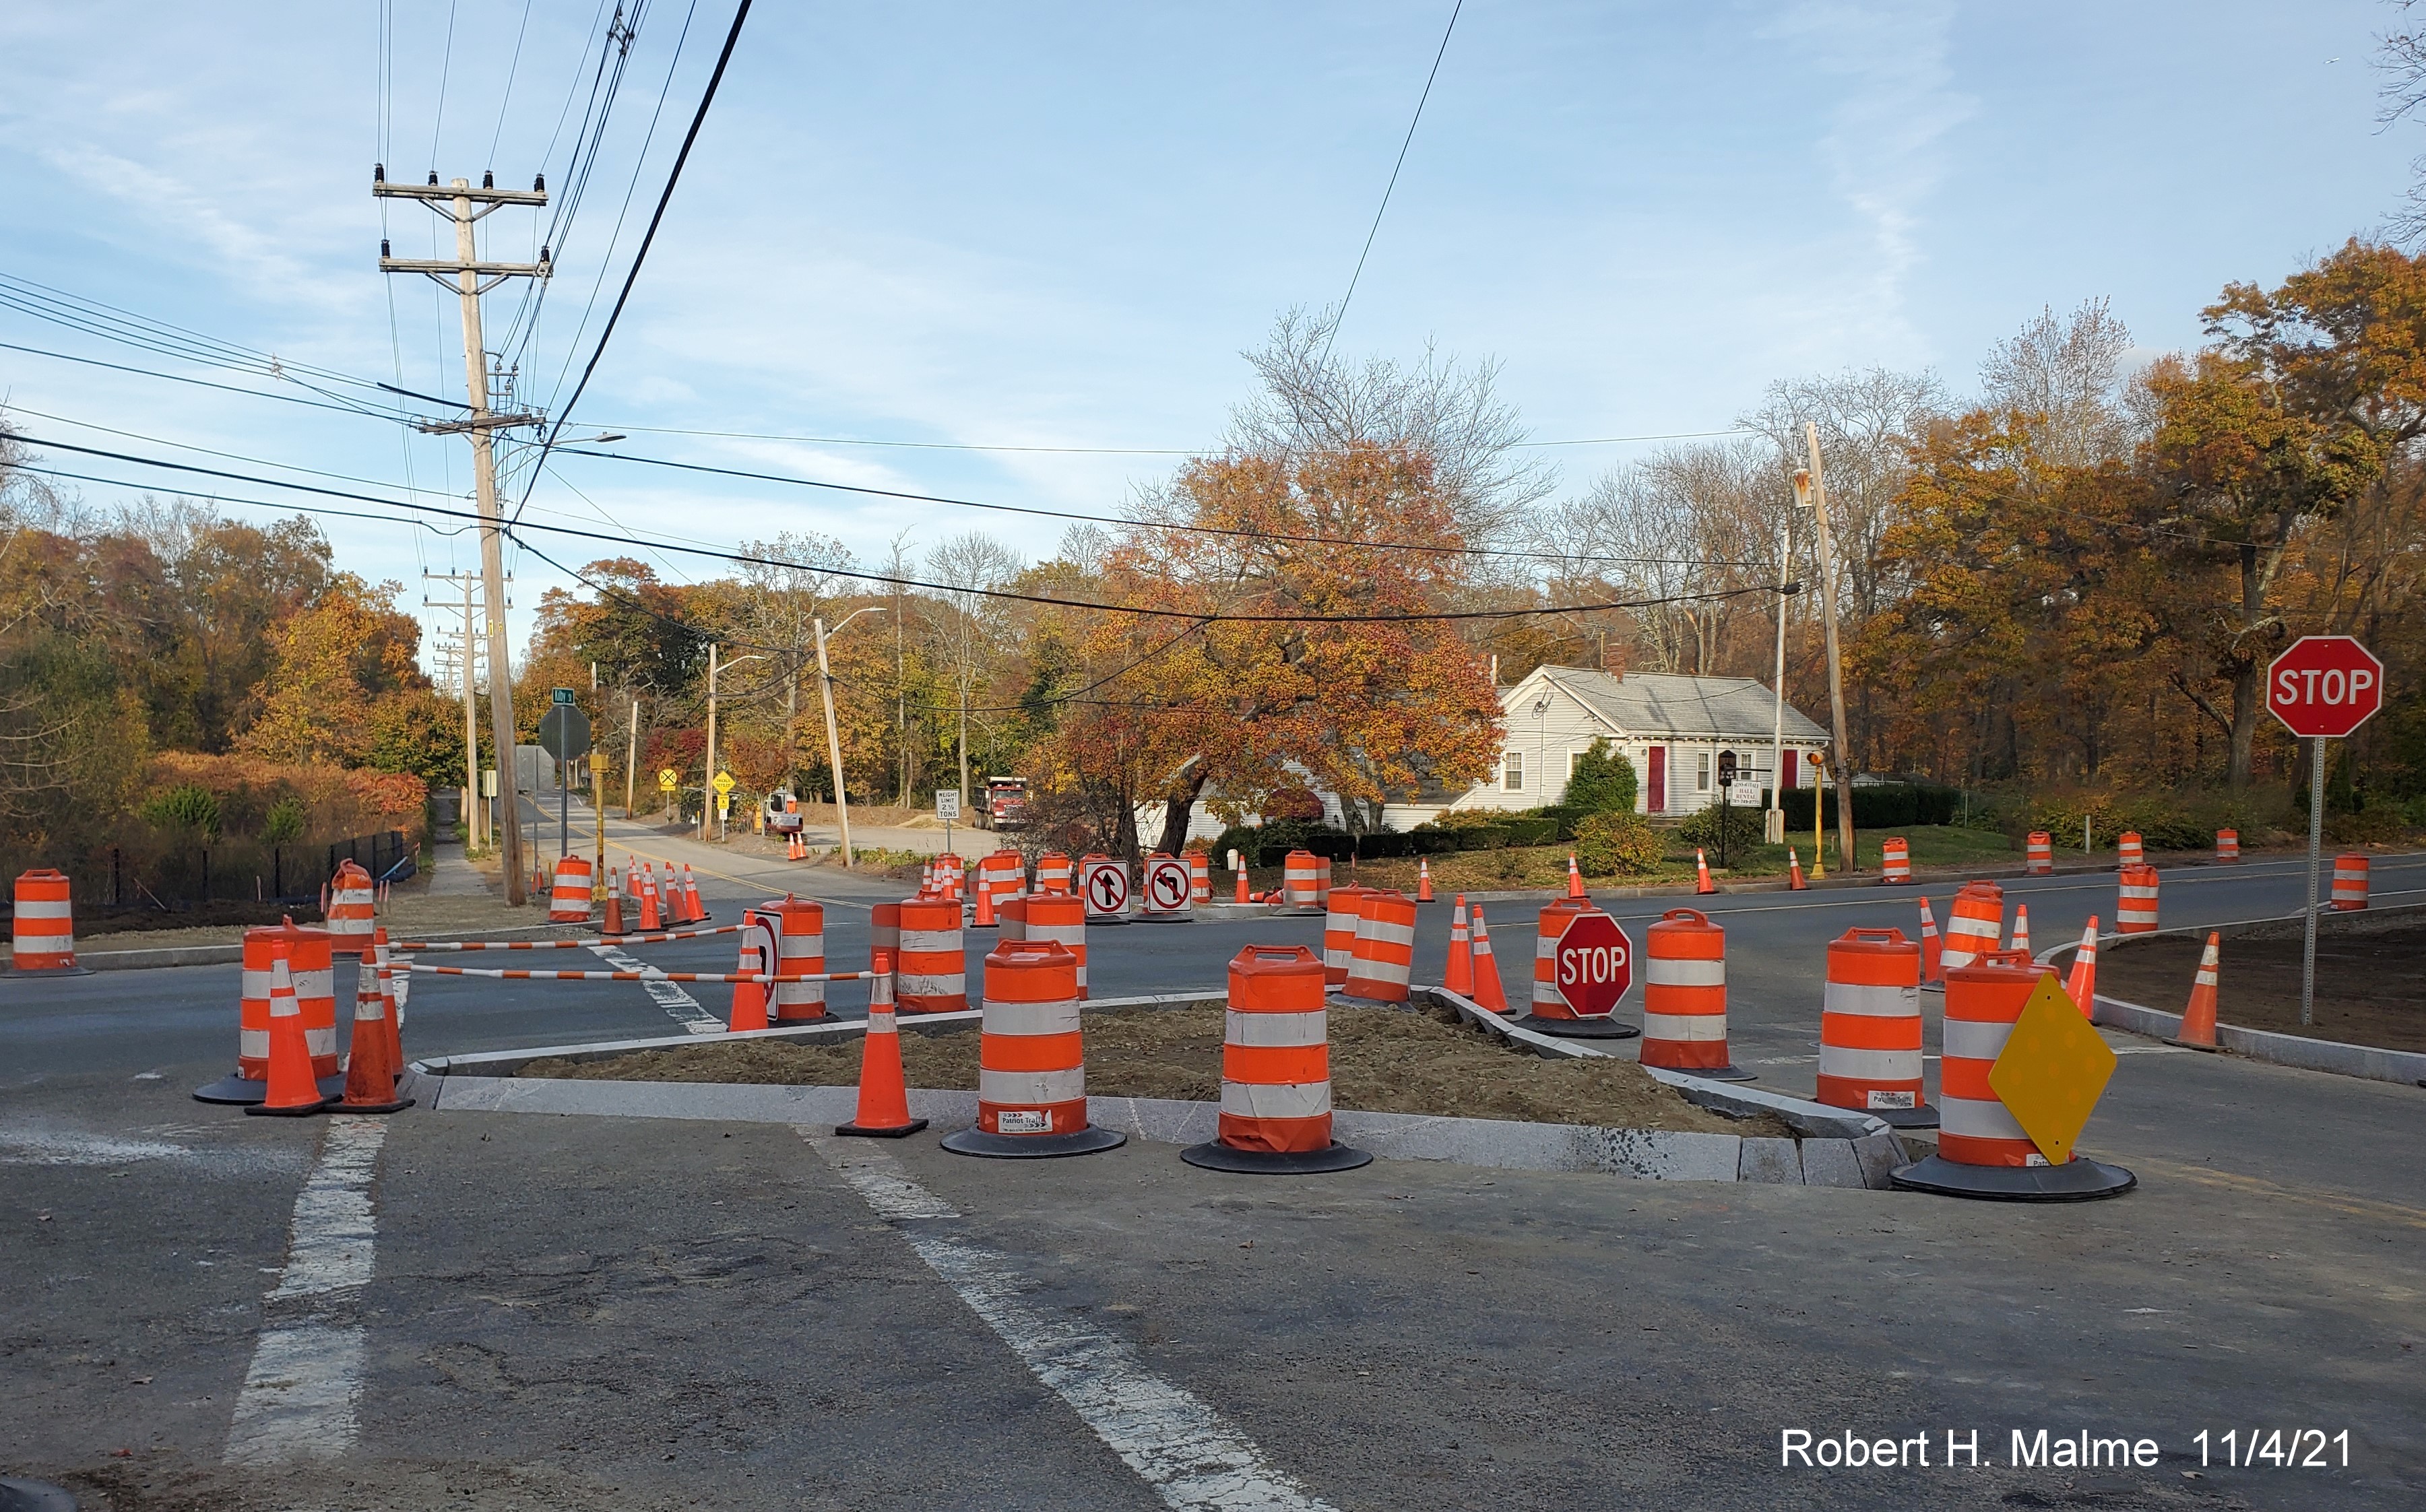 Image of new traffic island constructed to allow only right turns on Kilby Street intersection with MA 3A South in Hingham, November 2021